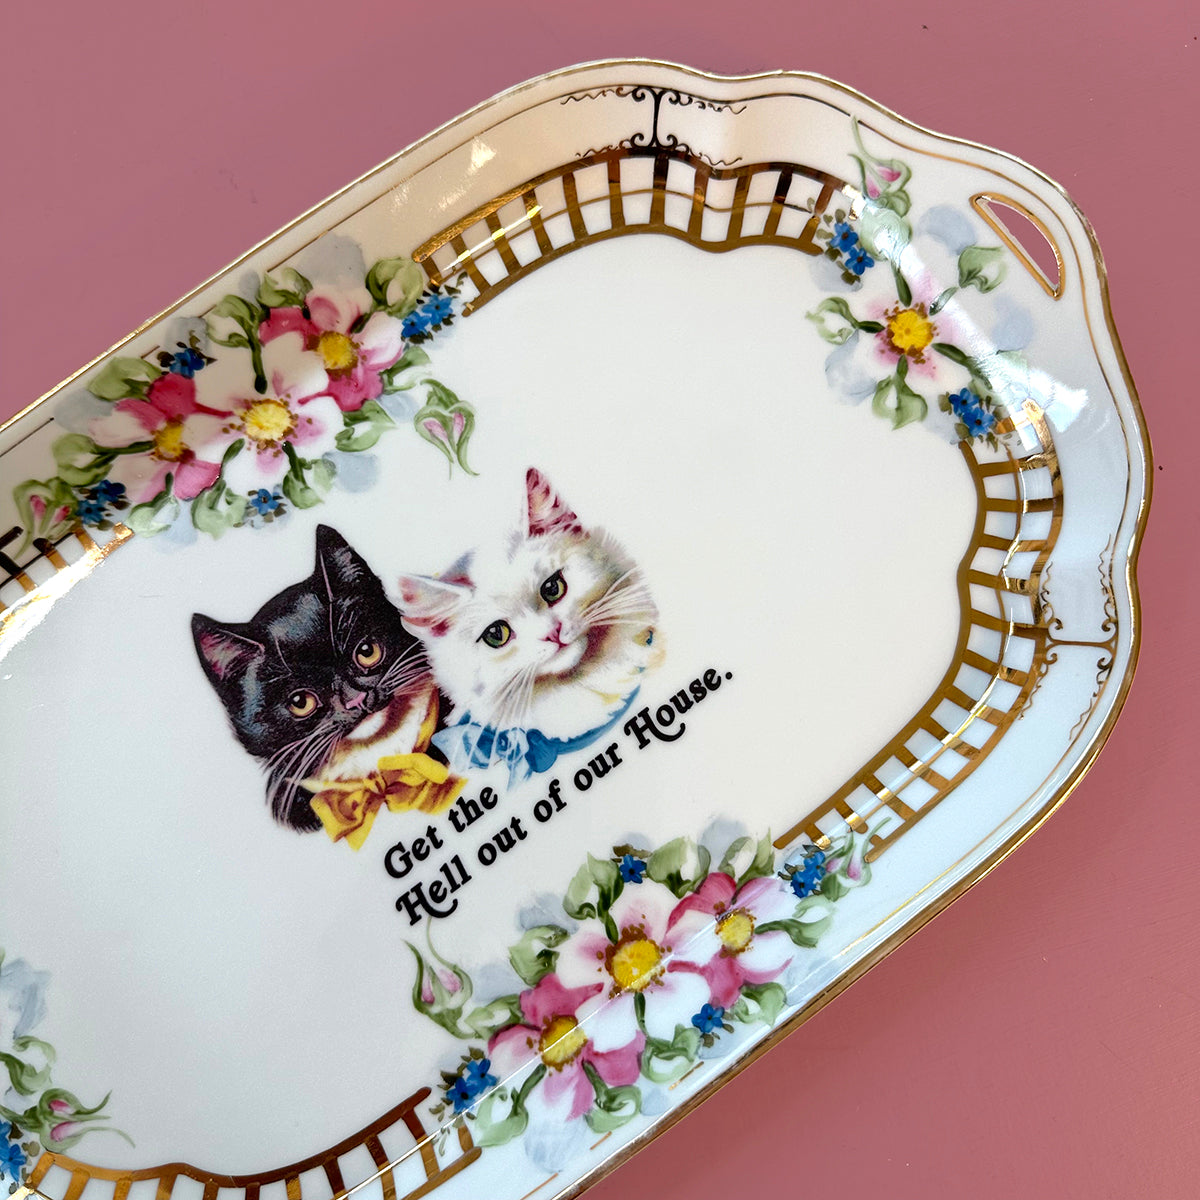 Antique Art Platter - Cat plate - "Get the Hell Out of Our House"